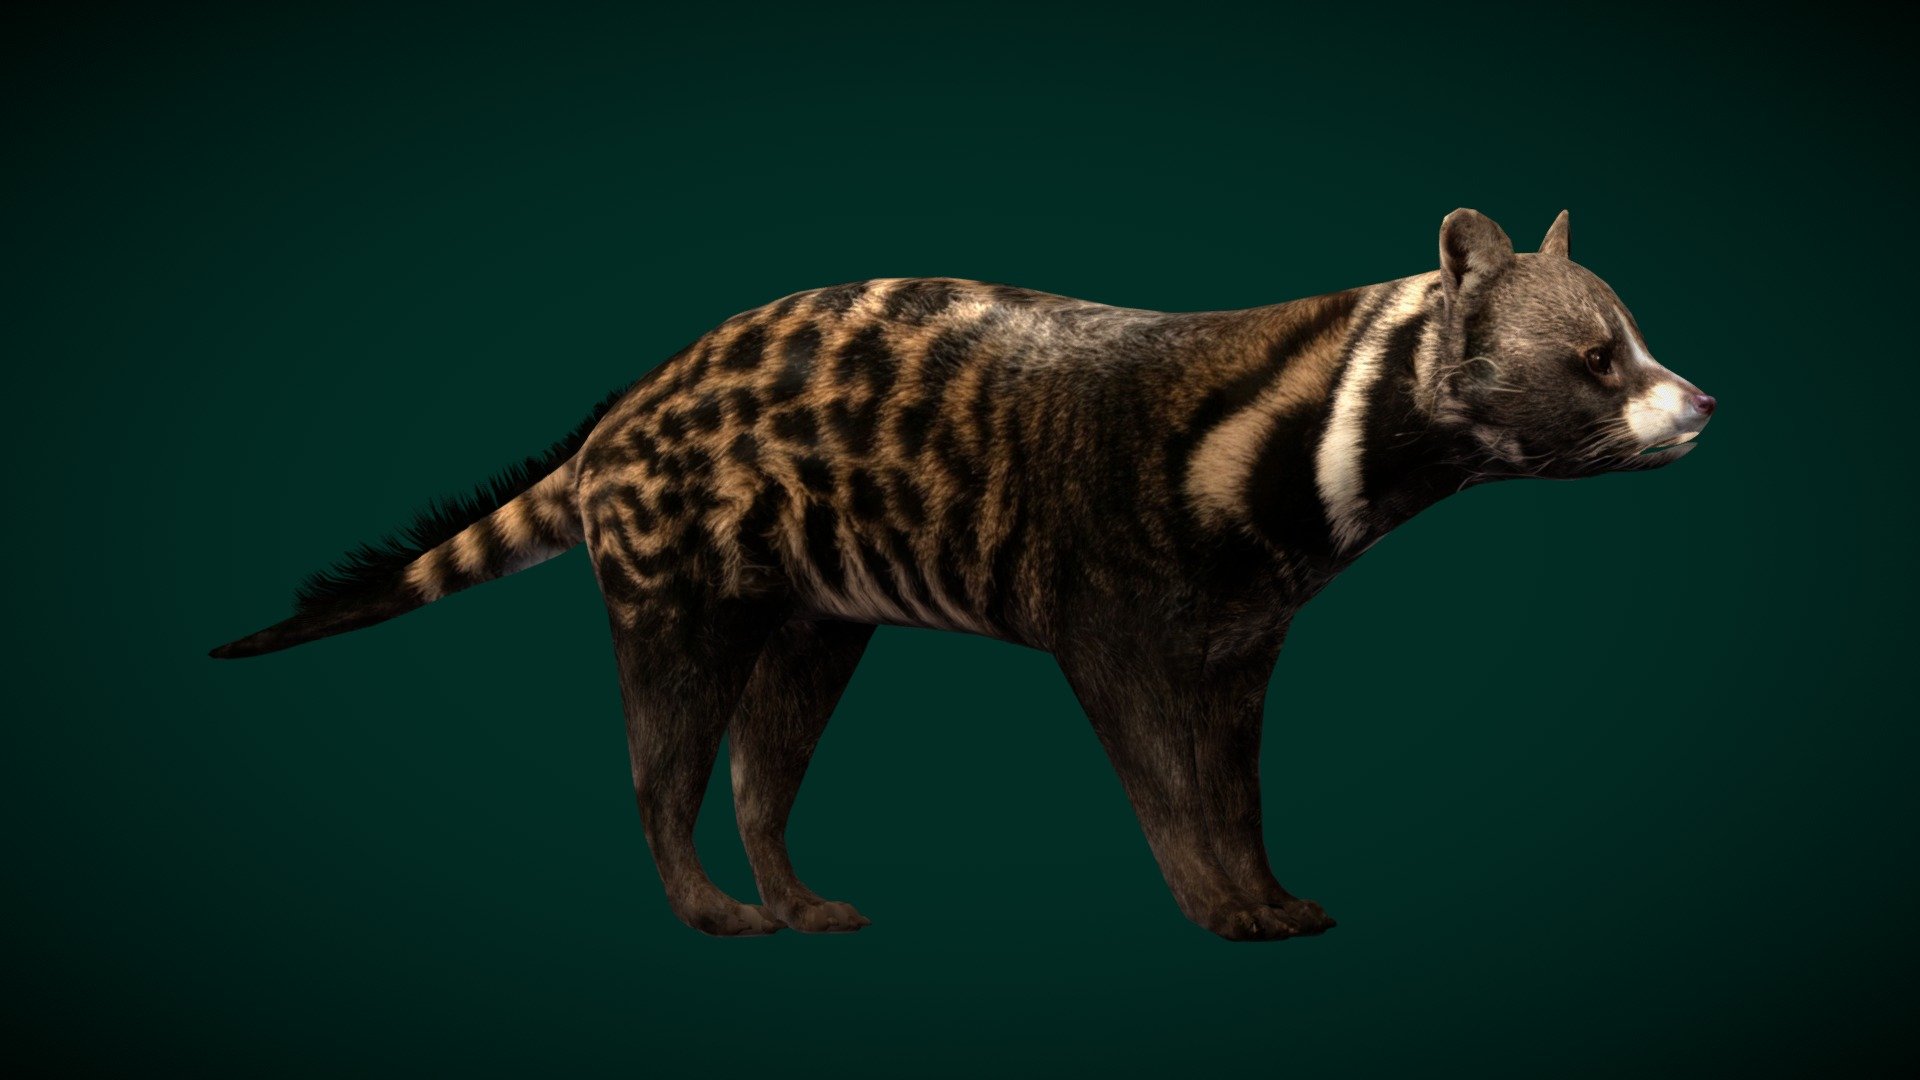 African Civet (Viverridae )Carnivora

Civettictis civetta australis Animals Mammal Safari North near Brainerd, Minnesota.

1 Draw Calls

Lowpoly

Game Ready Asset

Subdivision Surface Ready

12 - Animations

4K PBR Textures Material

Unreal FBX (Unreal 4,5 Plus)

Unity FBX

Blend File 3.6.5 LTS

USDZ File (AR Ready). Real Scale Dimension (Xcode ,Reality Composer, Keynote Ready)

Textures Files

GLB File (Unreal 5.1 Plus Native Support)


Gltf File ( Spark AR, Lens Studio(SnapChat) , Effector(Tiktok) , Spline, Play Canvas,Omiverse ) Compatible




Triangles -9154  



Faces -6204

Edges -12871

Vertices -7140

Diffuse, Metallic, Roughness , Normal Map ,Specular Map,AO

An African civet  at Safari North near Brainerd, Minnesota.
The African civet is a large viverrid native to sub-Saharan Africa, where it is considered common and widely distributed in woodlands and secondary forests. It is listed as Least Concern on the IUCN Red List since 2008 3d model